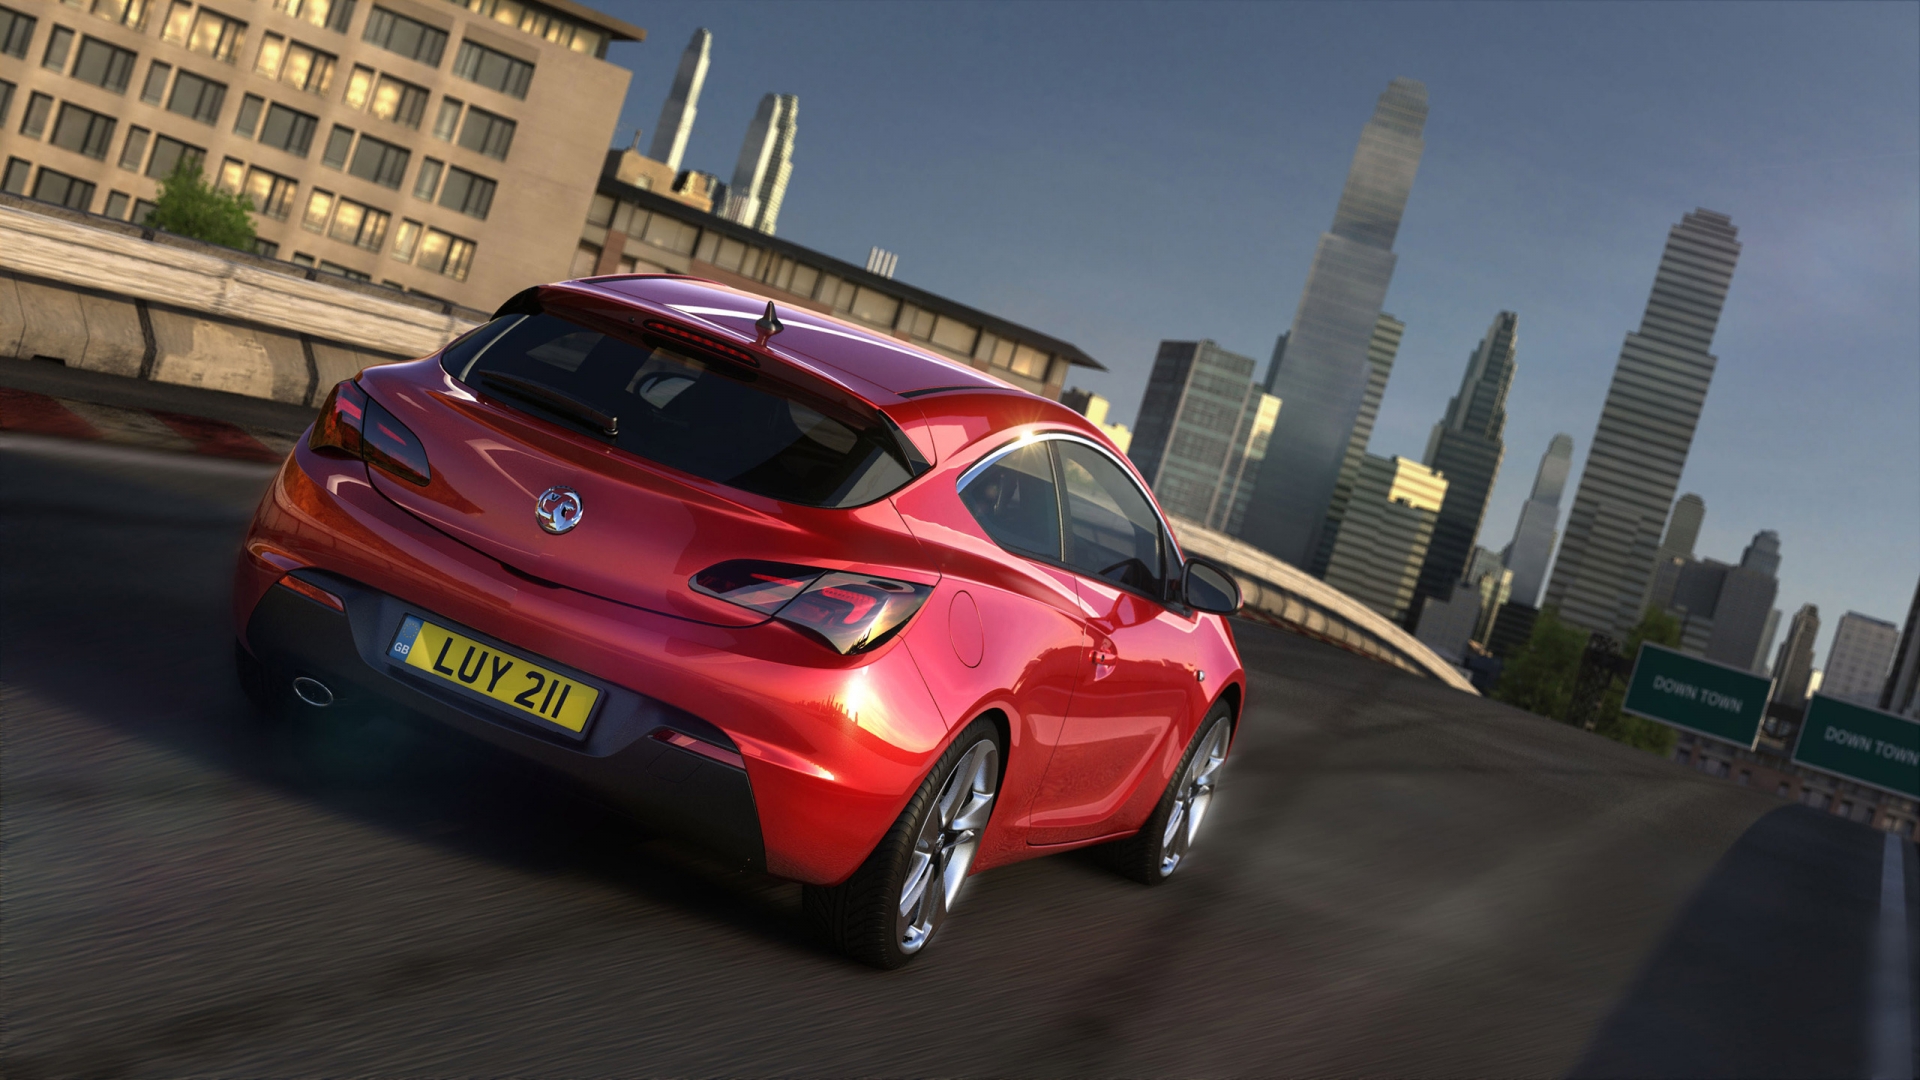 2012 Vauxhall Astra GTC Speed for 1920 x 1080 HDTV 1080p resolution